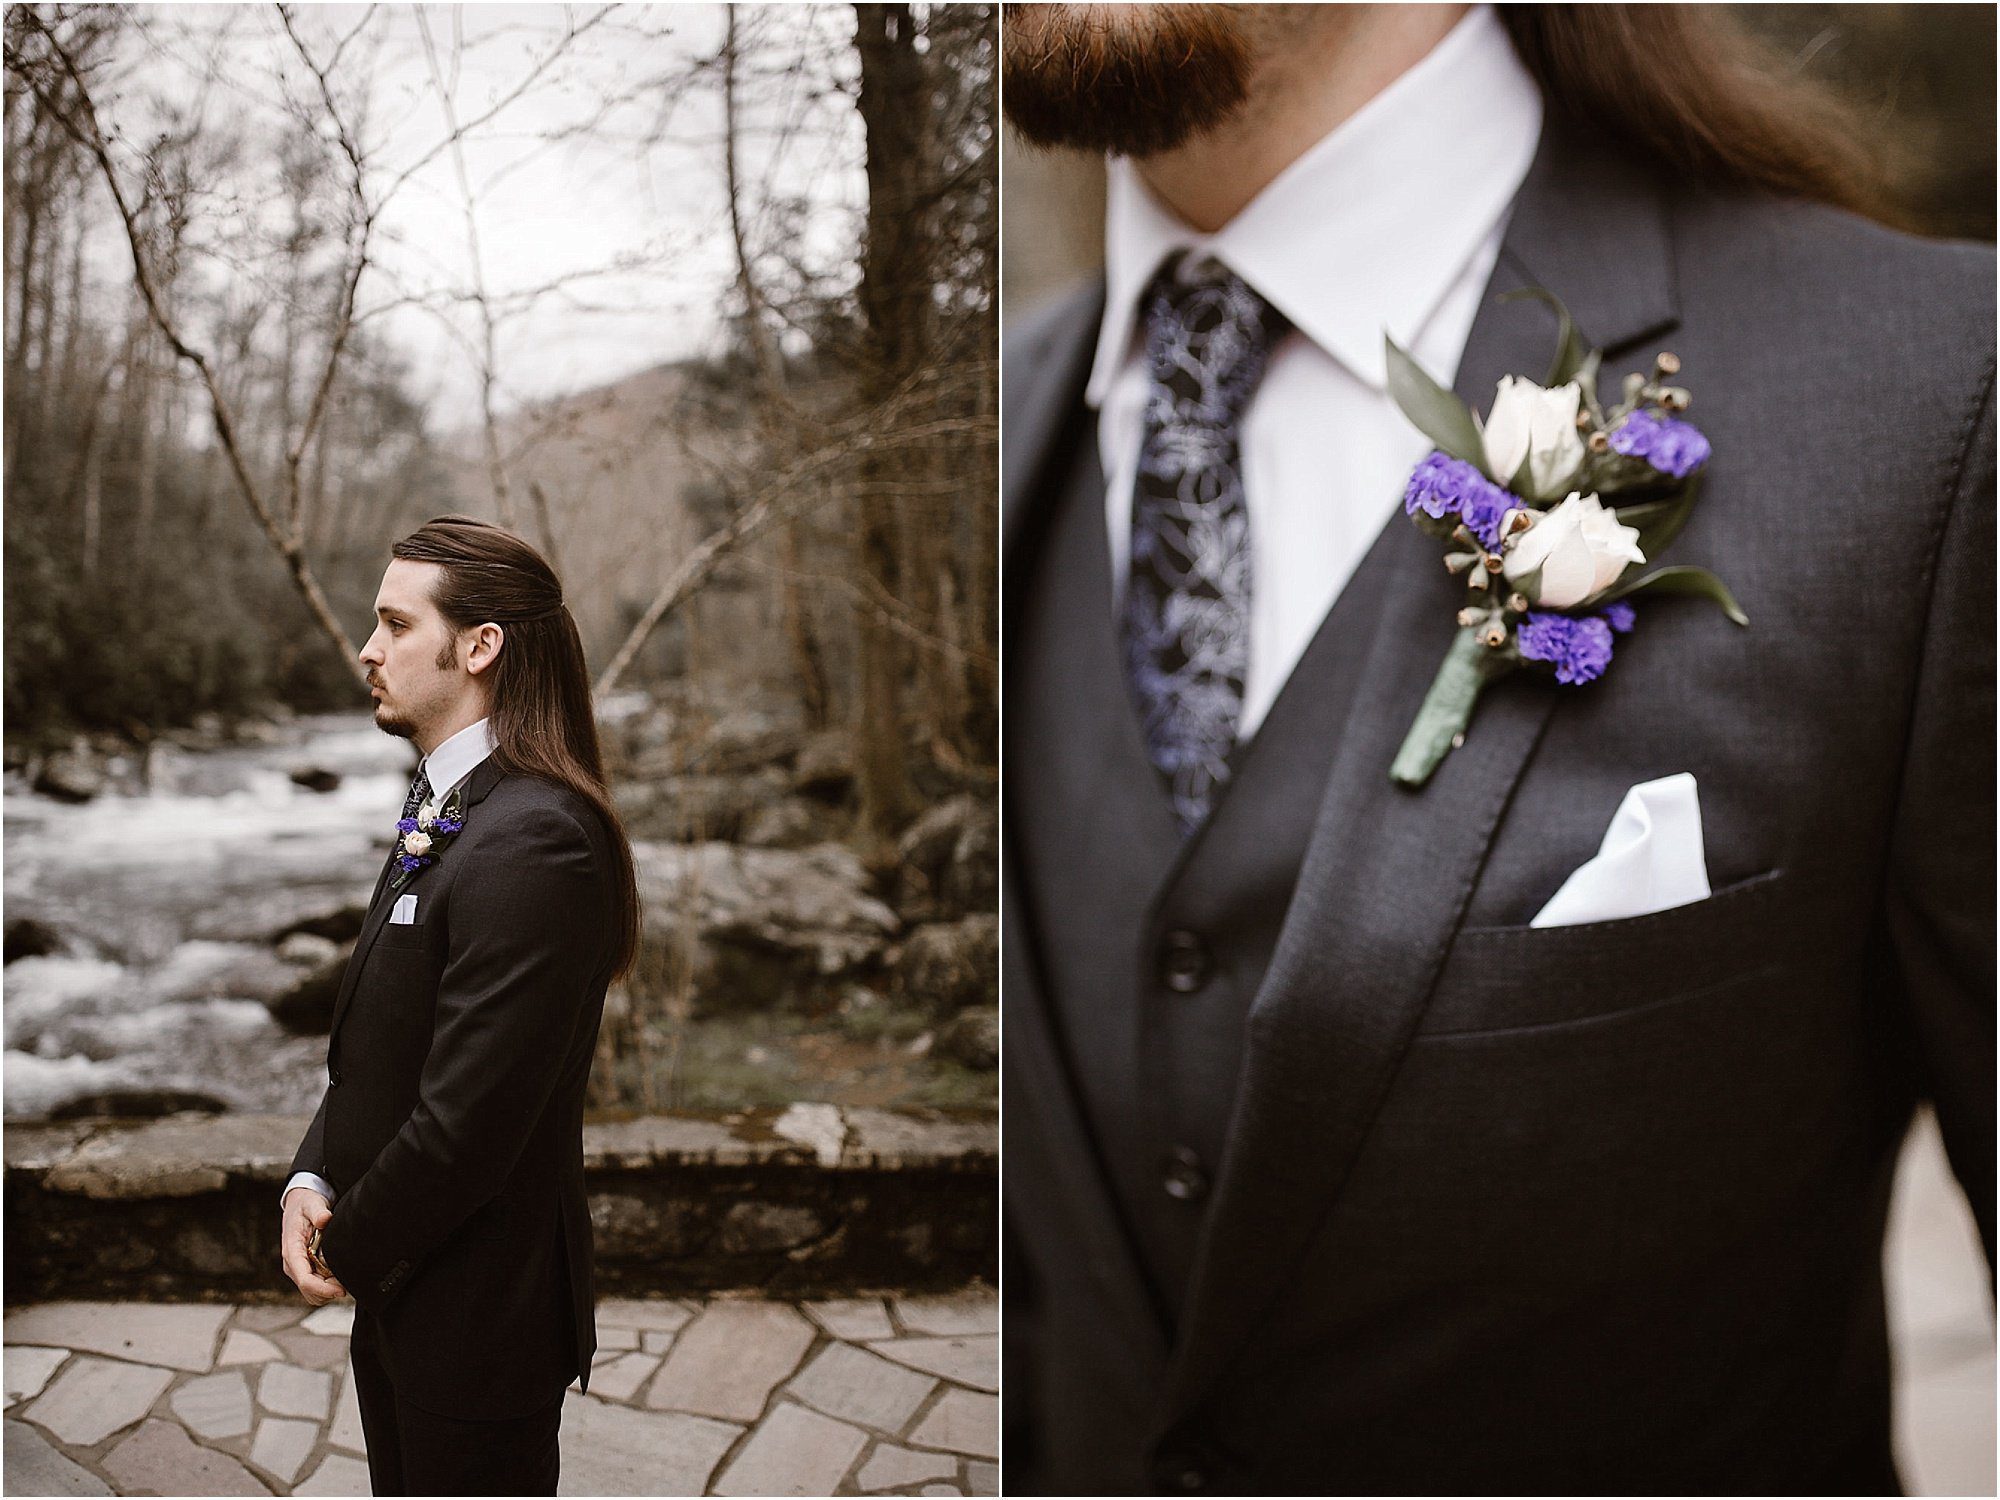 Groom waiting for bride at First Look at Elopement